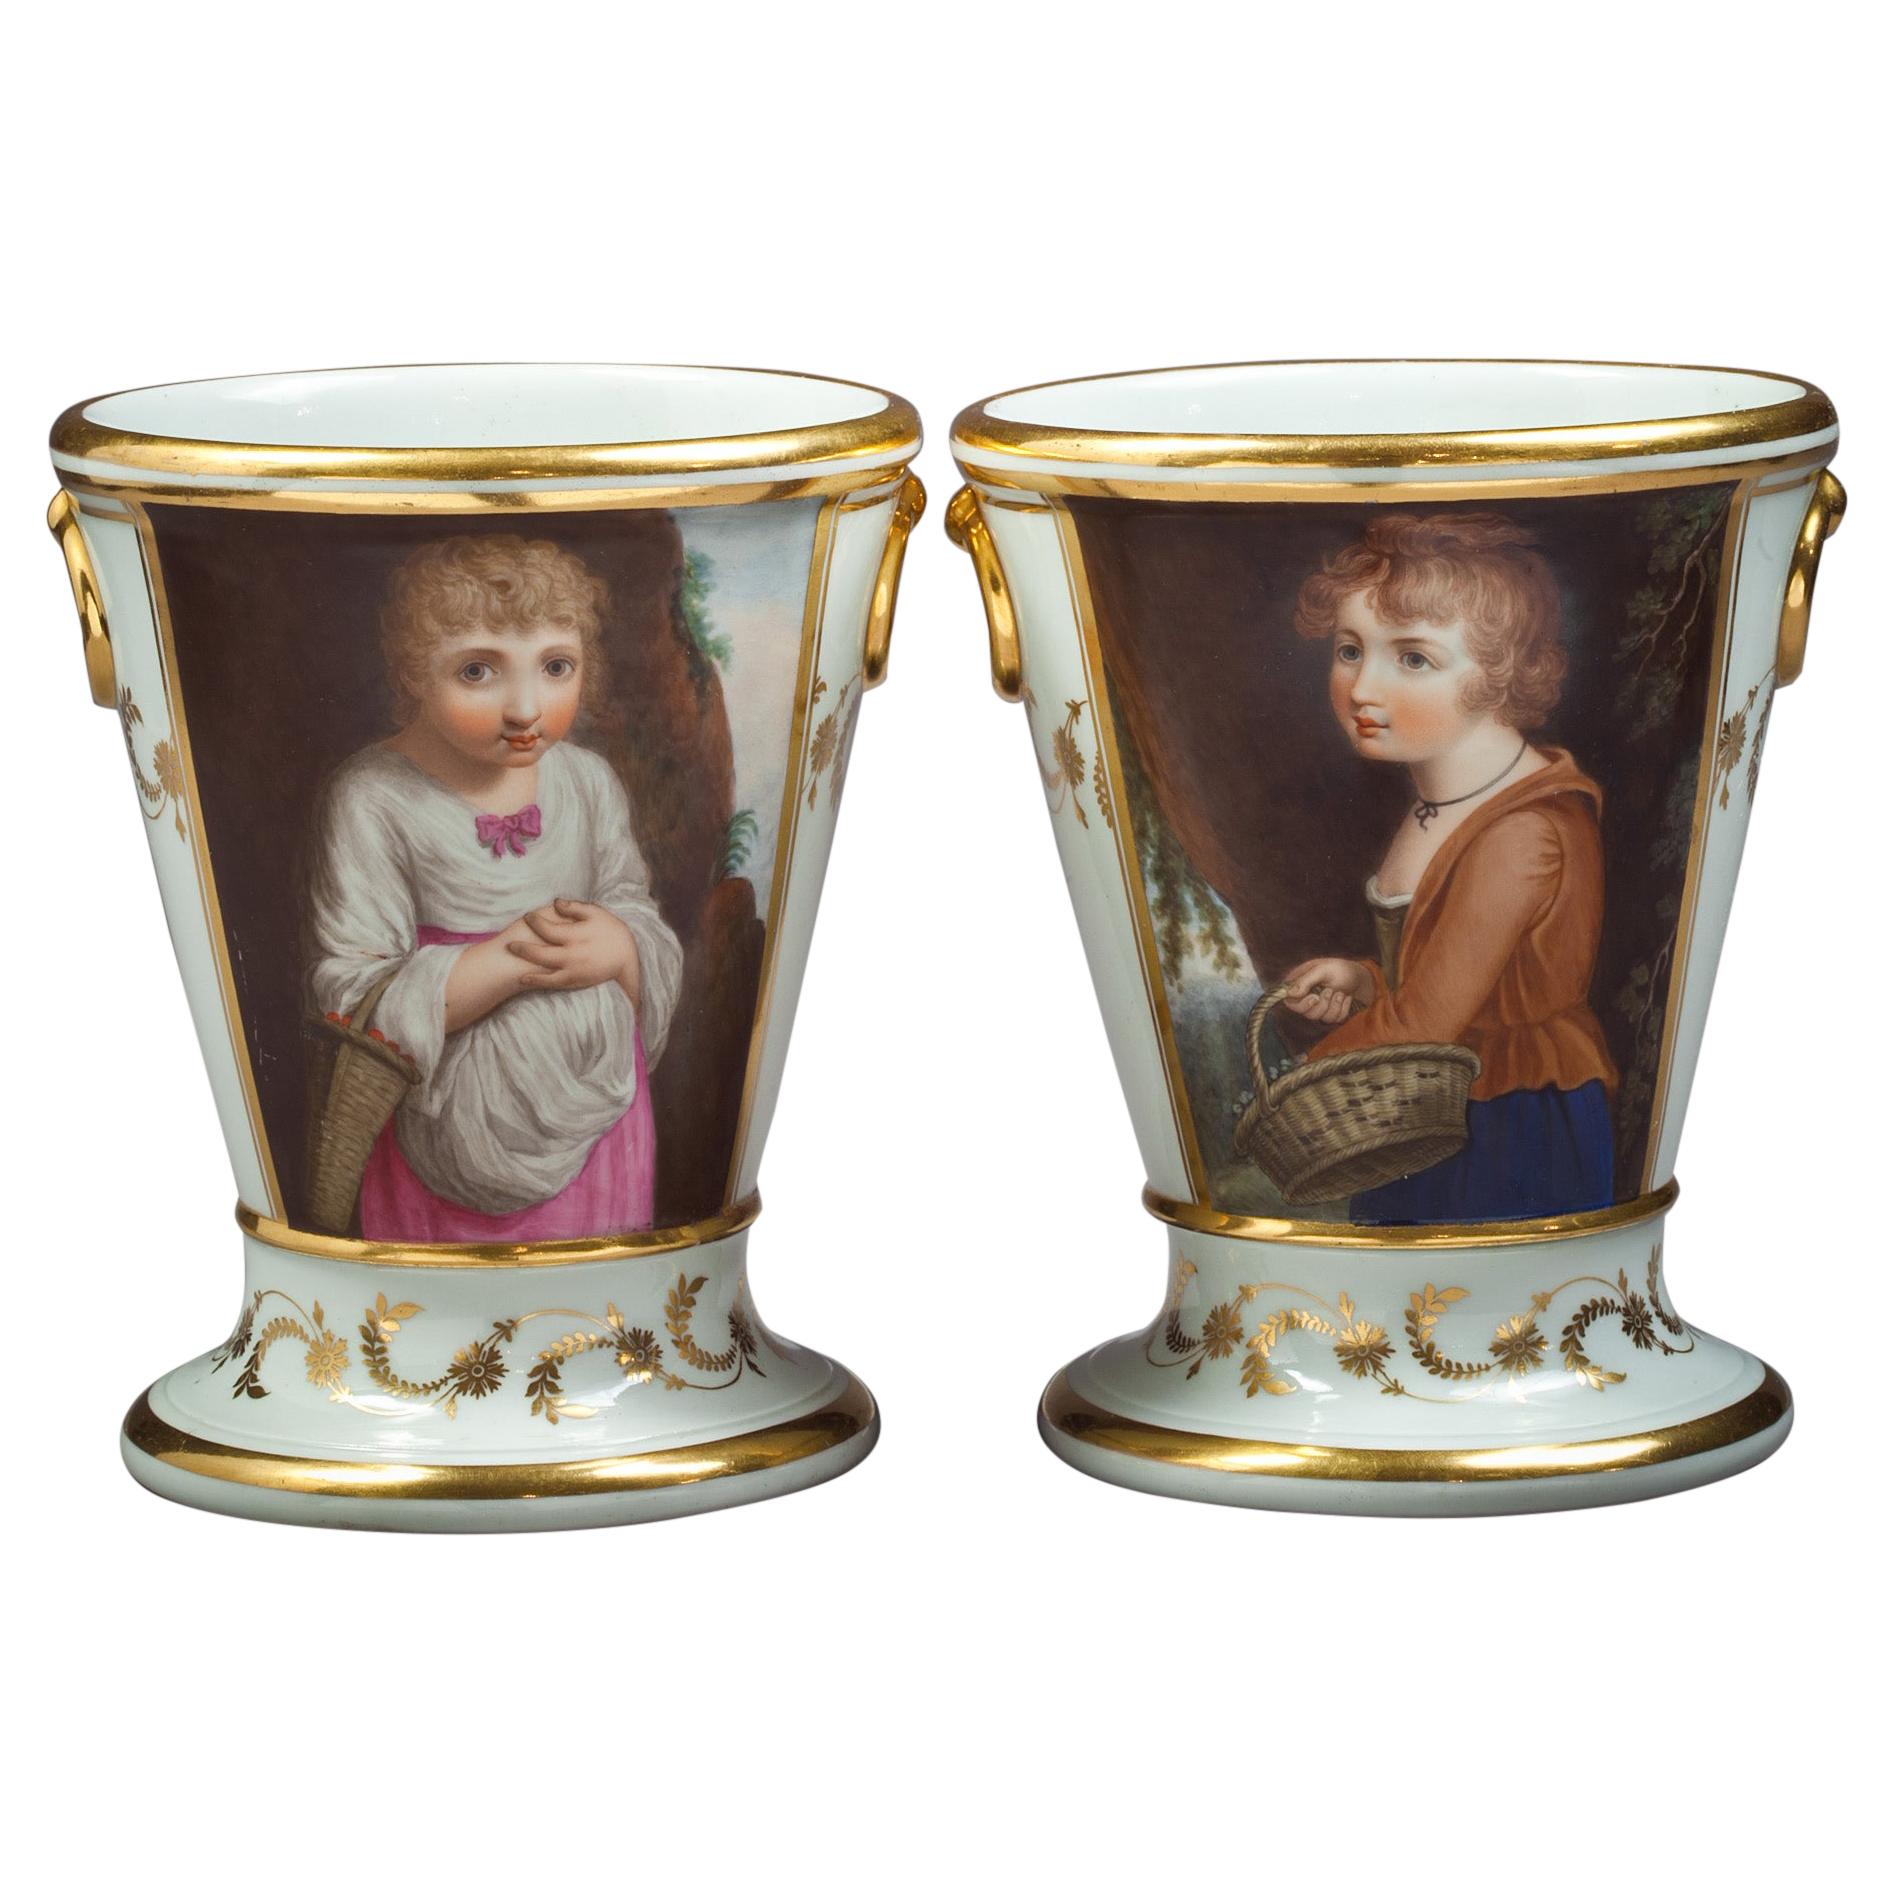 Pair of English Porcelain Cachepots on Stands, Flight Barr and Barr, circa 1800 For Sale